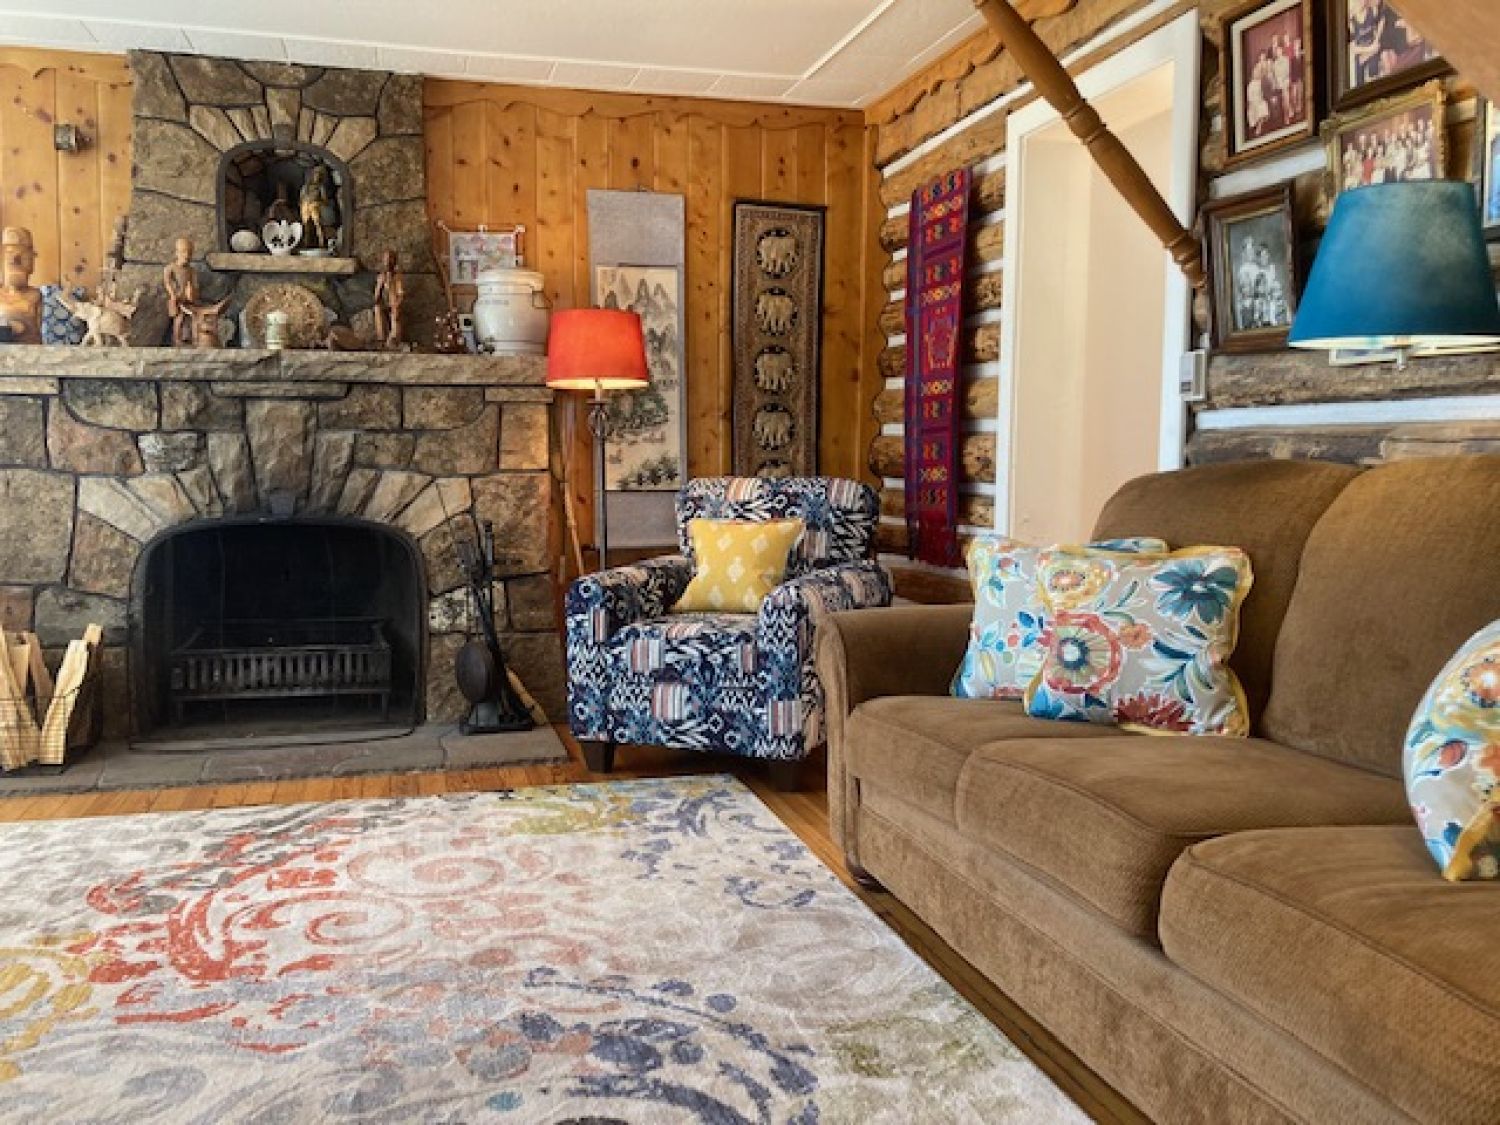 Edelweiss Mountain Haus - Cozy up to the beautiful stone fireplace!